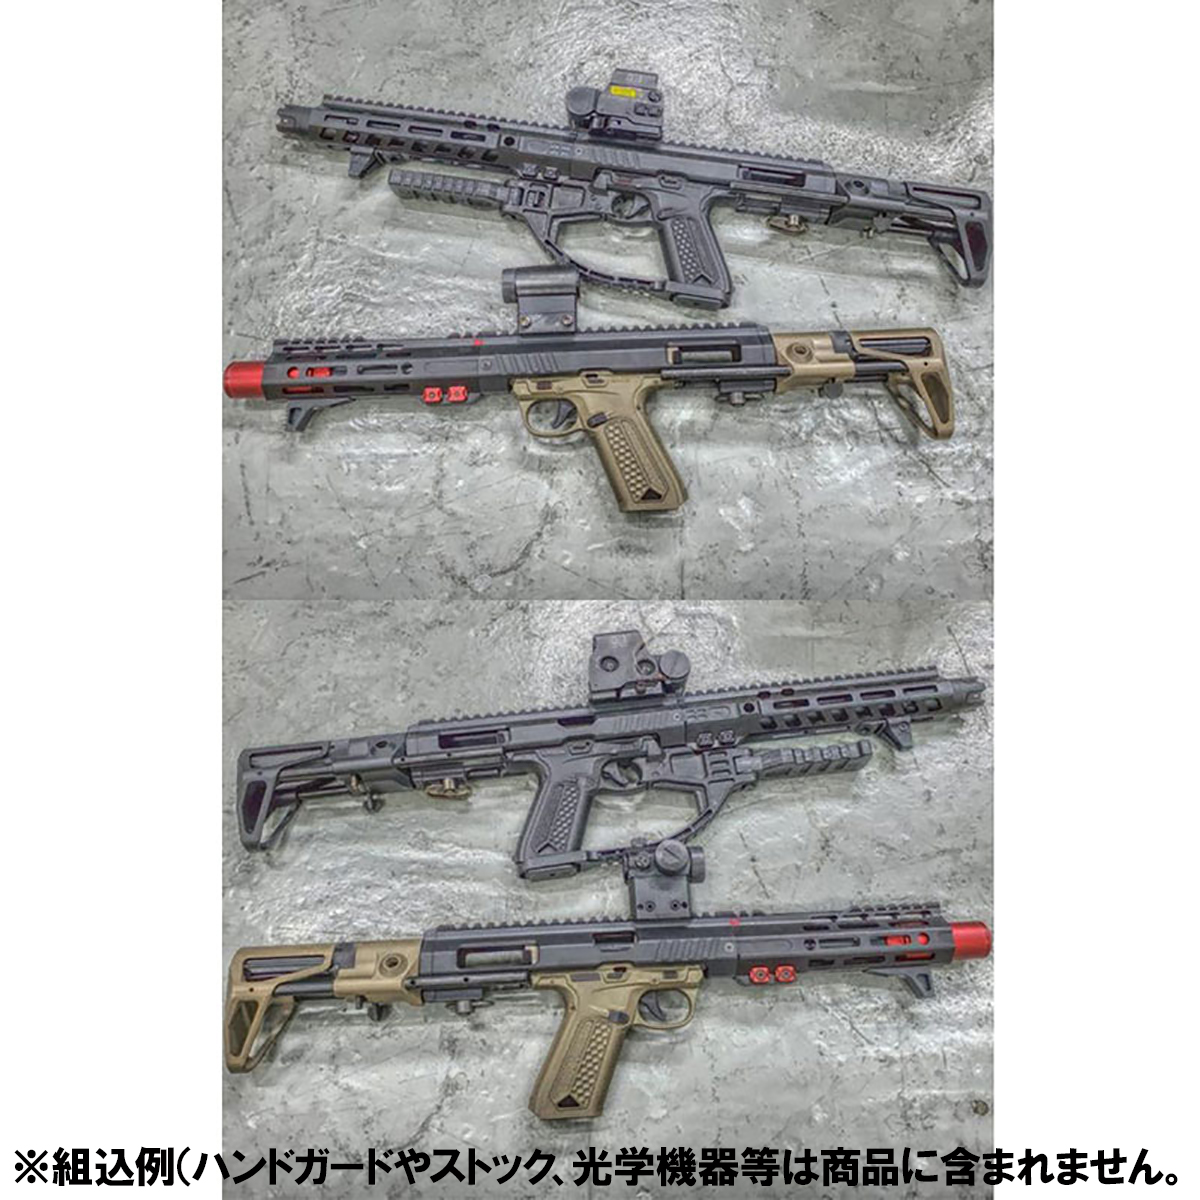 C&C TAC AI01 ライフルキット（Action Army AAP-01アサシン対応）